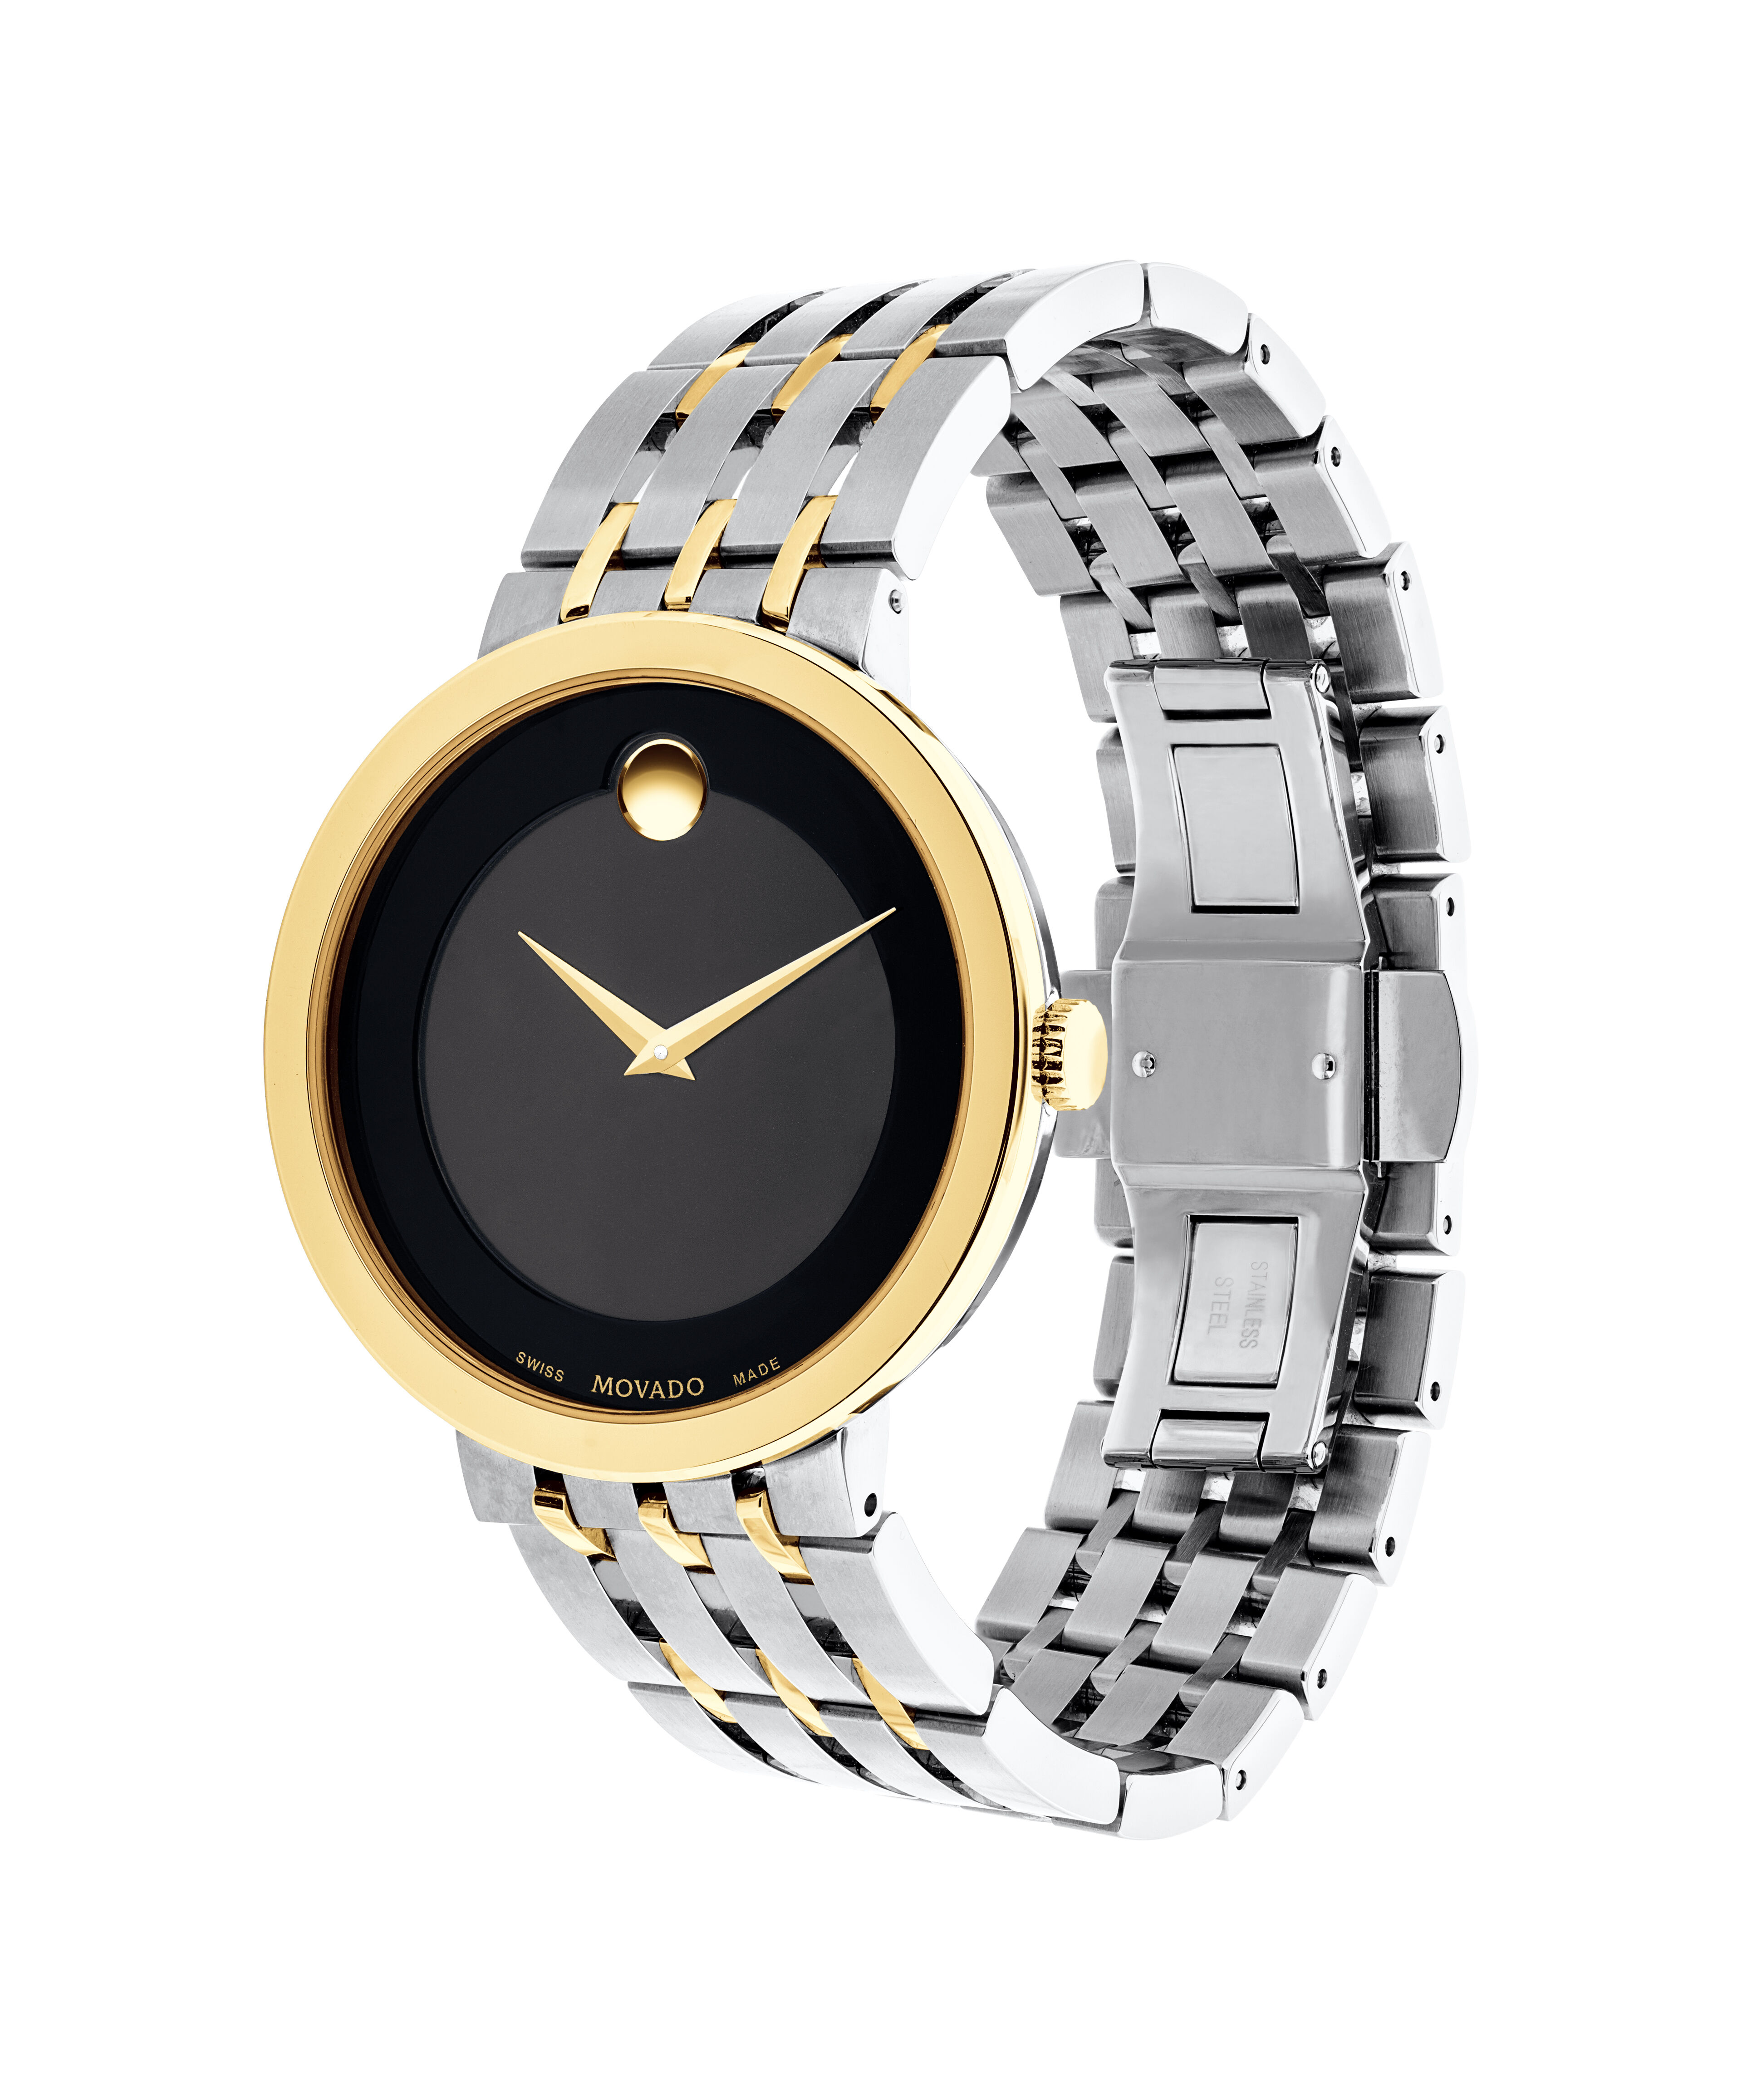 Movado Museum Black Dial Stainless Steel Men's Watch